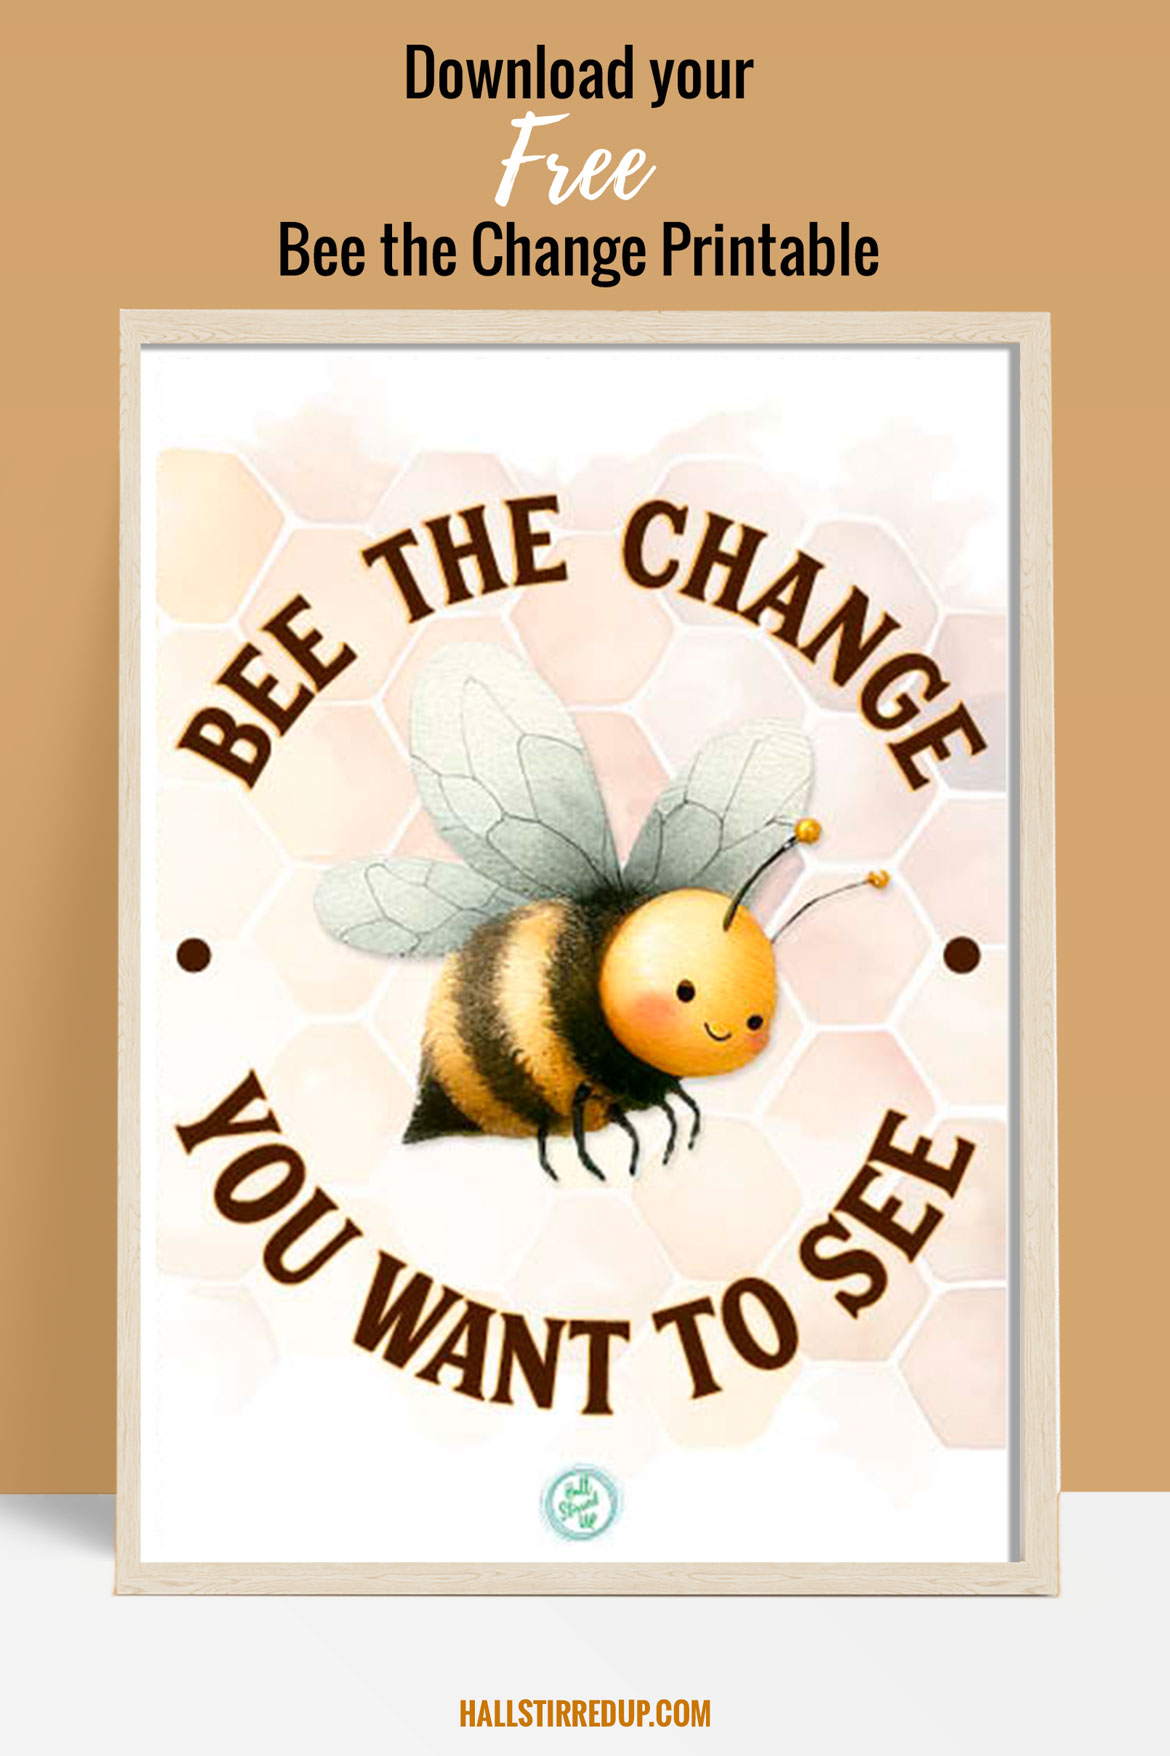 Celebrate Earth Day with a free 'Bee the Change' printable